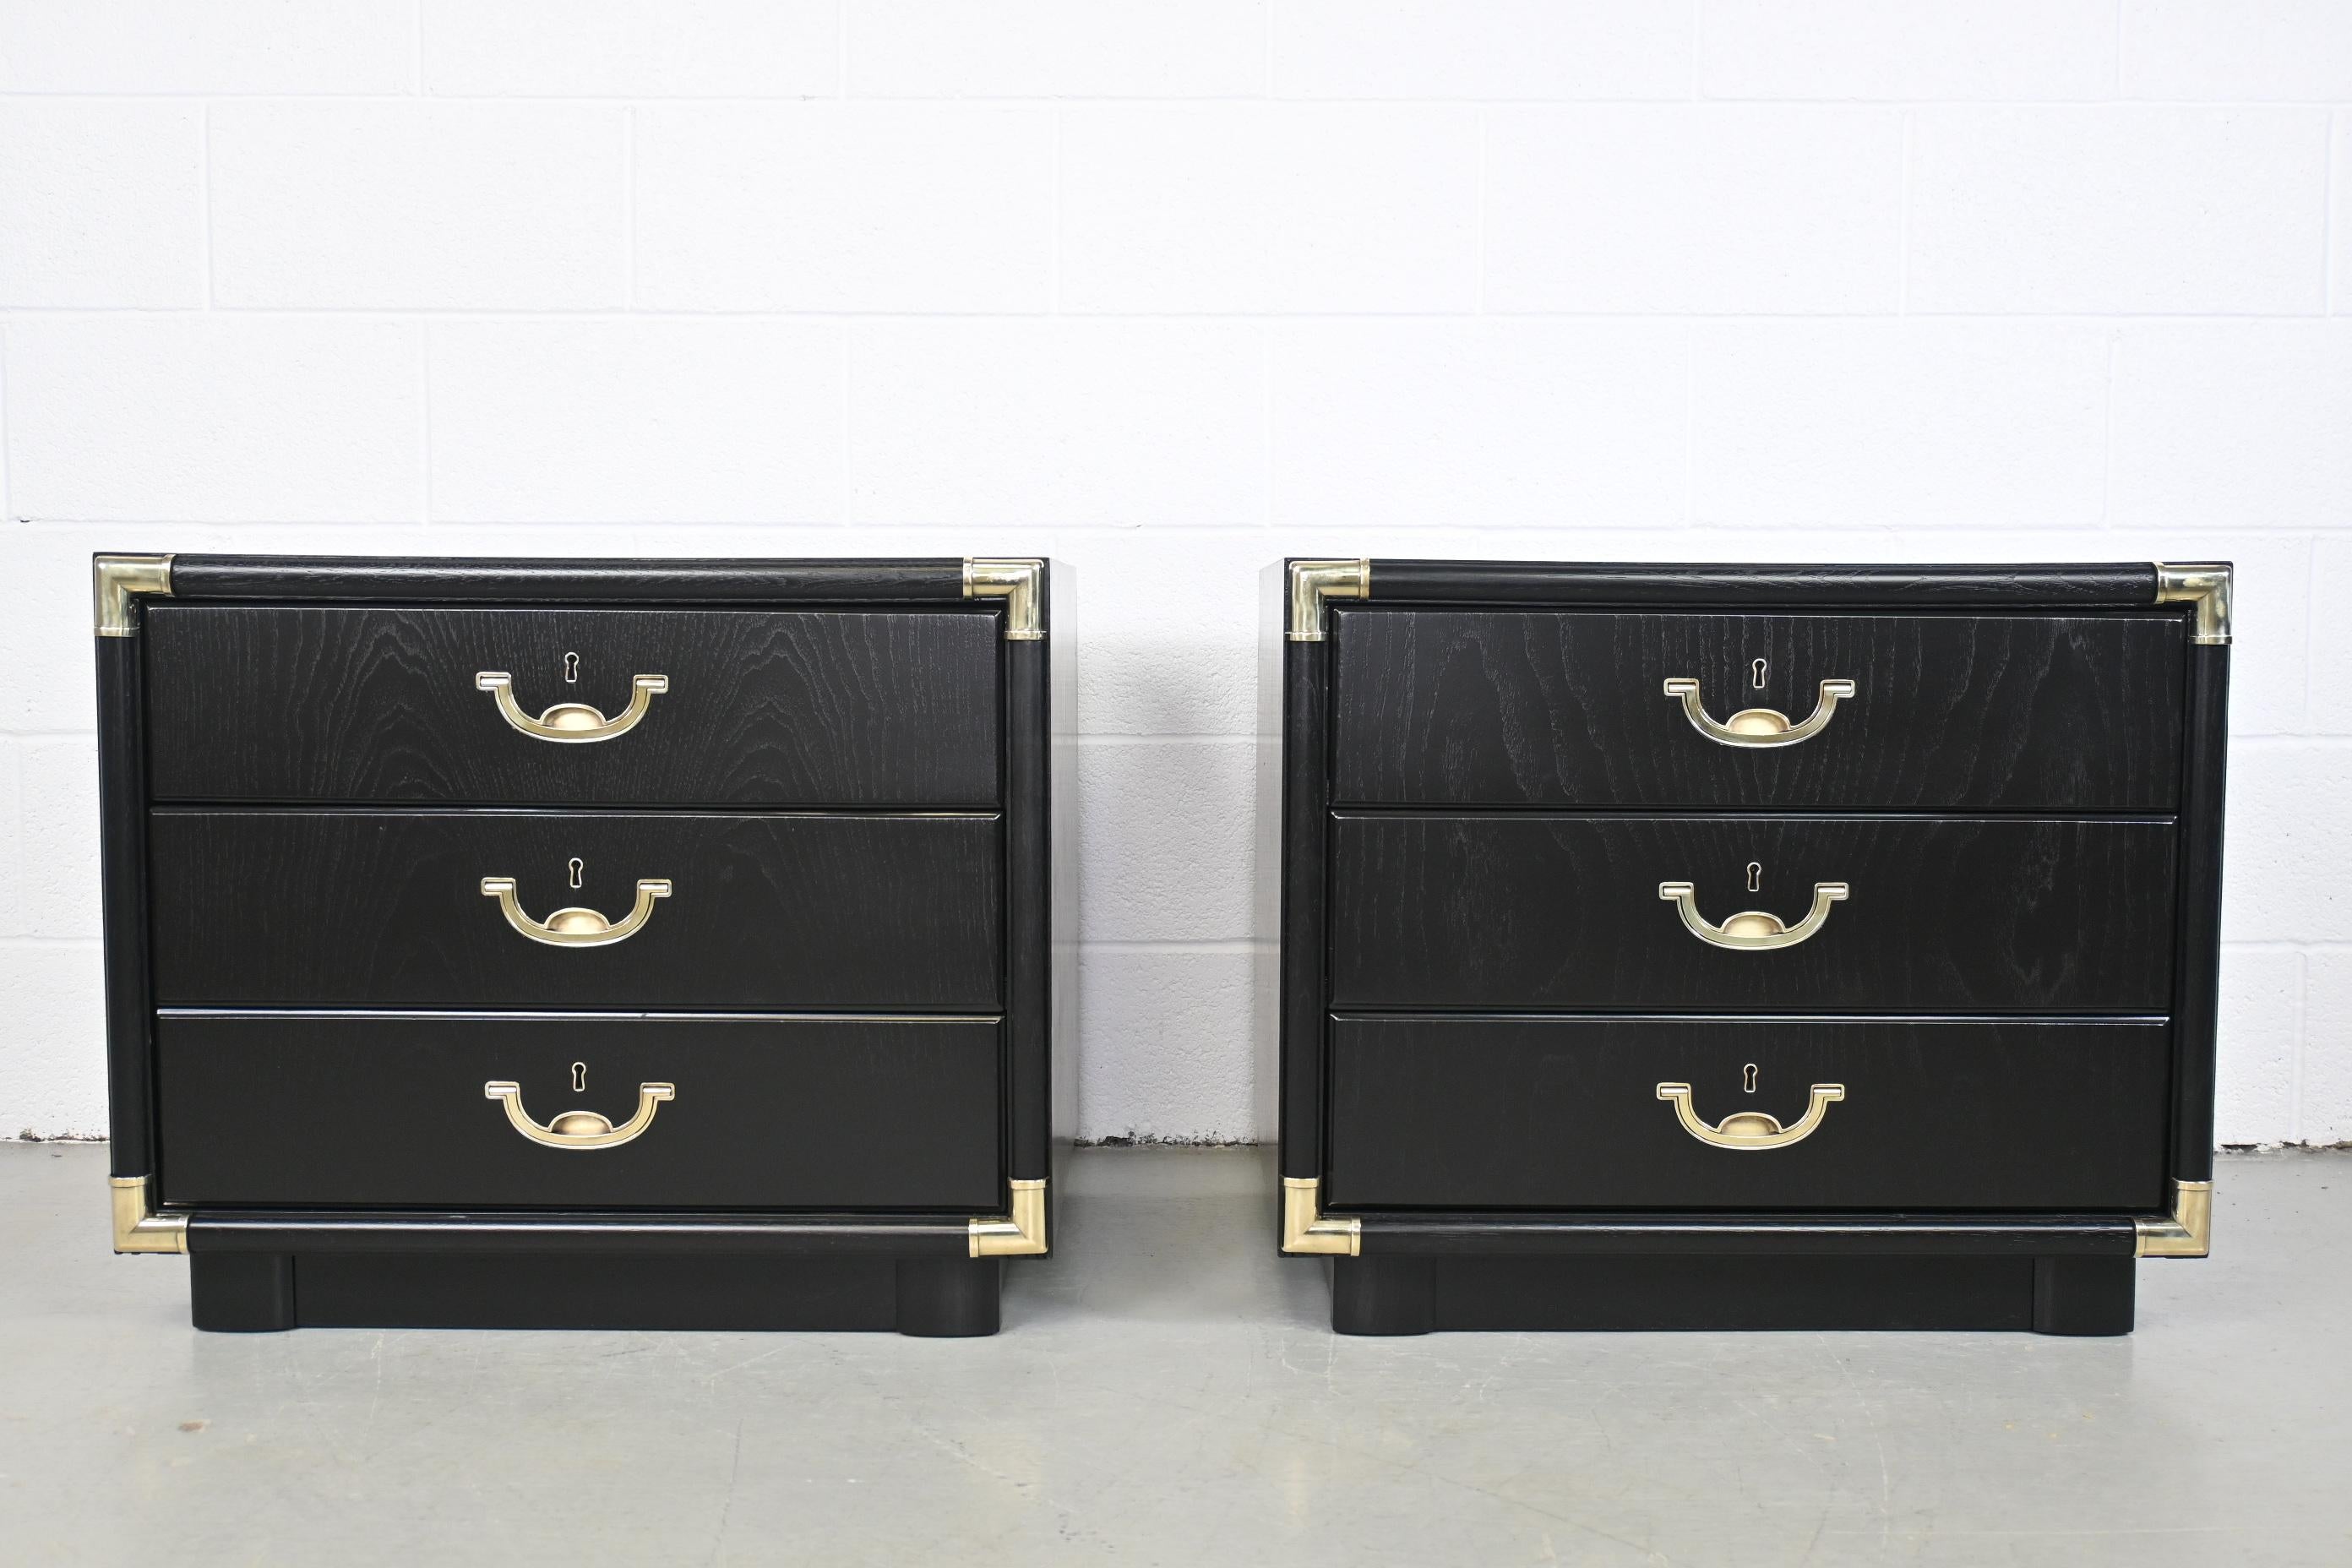 Drexel Accolade Campaign Style Black Lacquered Three Drawer Pair of Nightstands or End Tables

Drexel, USA, 1970s

Measures: 26.5 Wide x 18 Deep x 22.5 High

Mid Century Campaign style black lacquered three drawer nightstands with brass